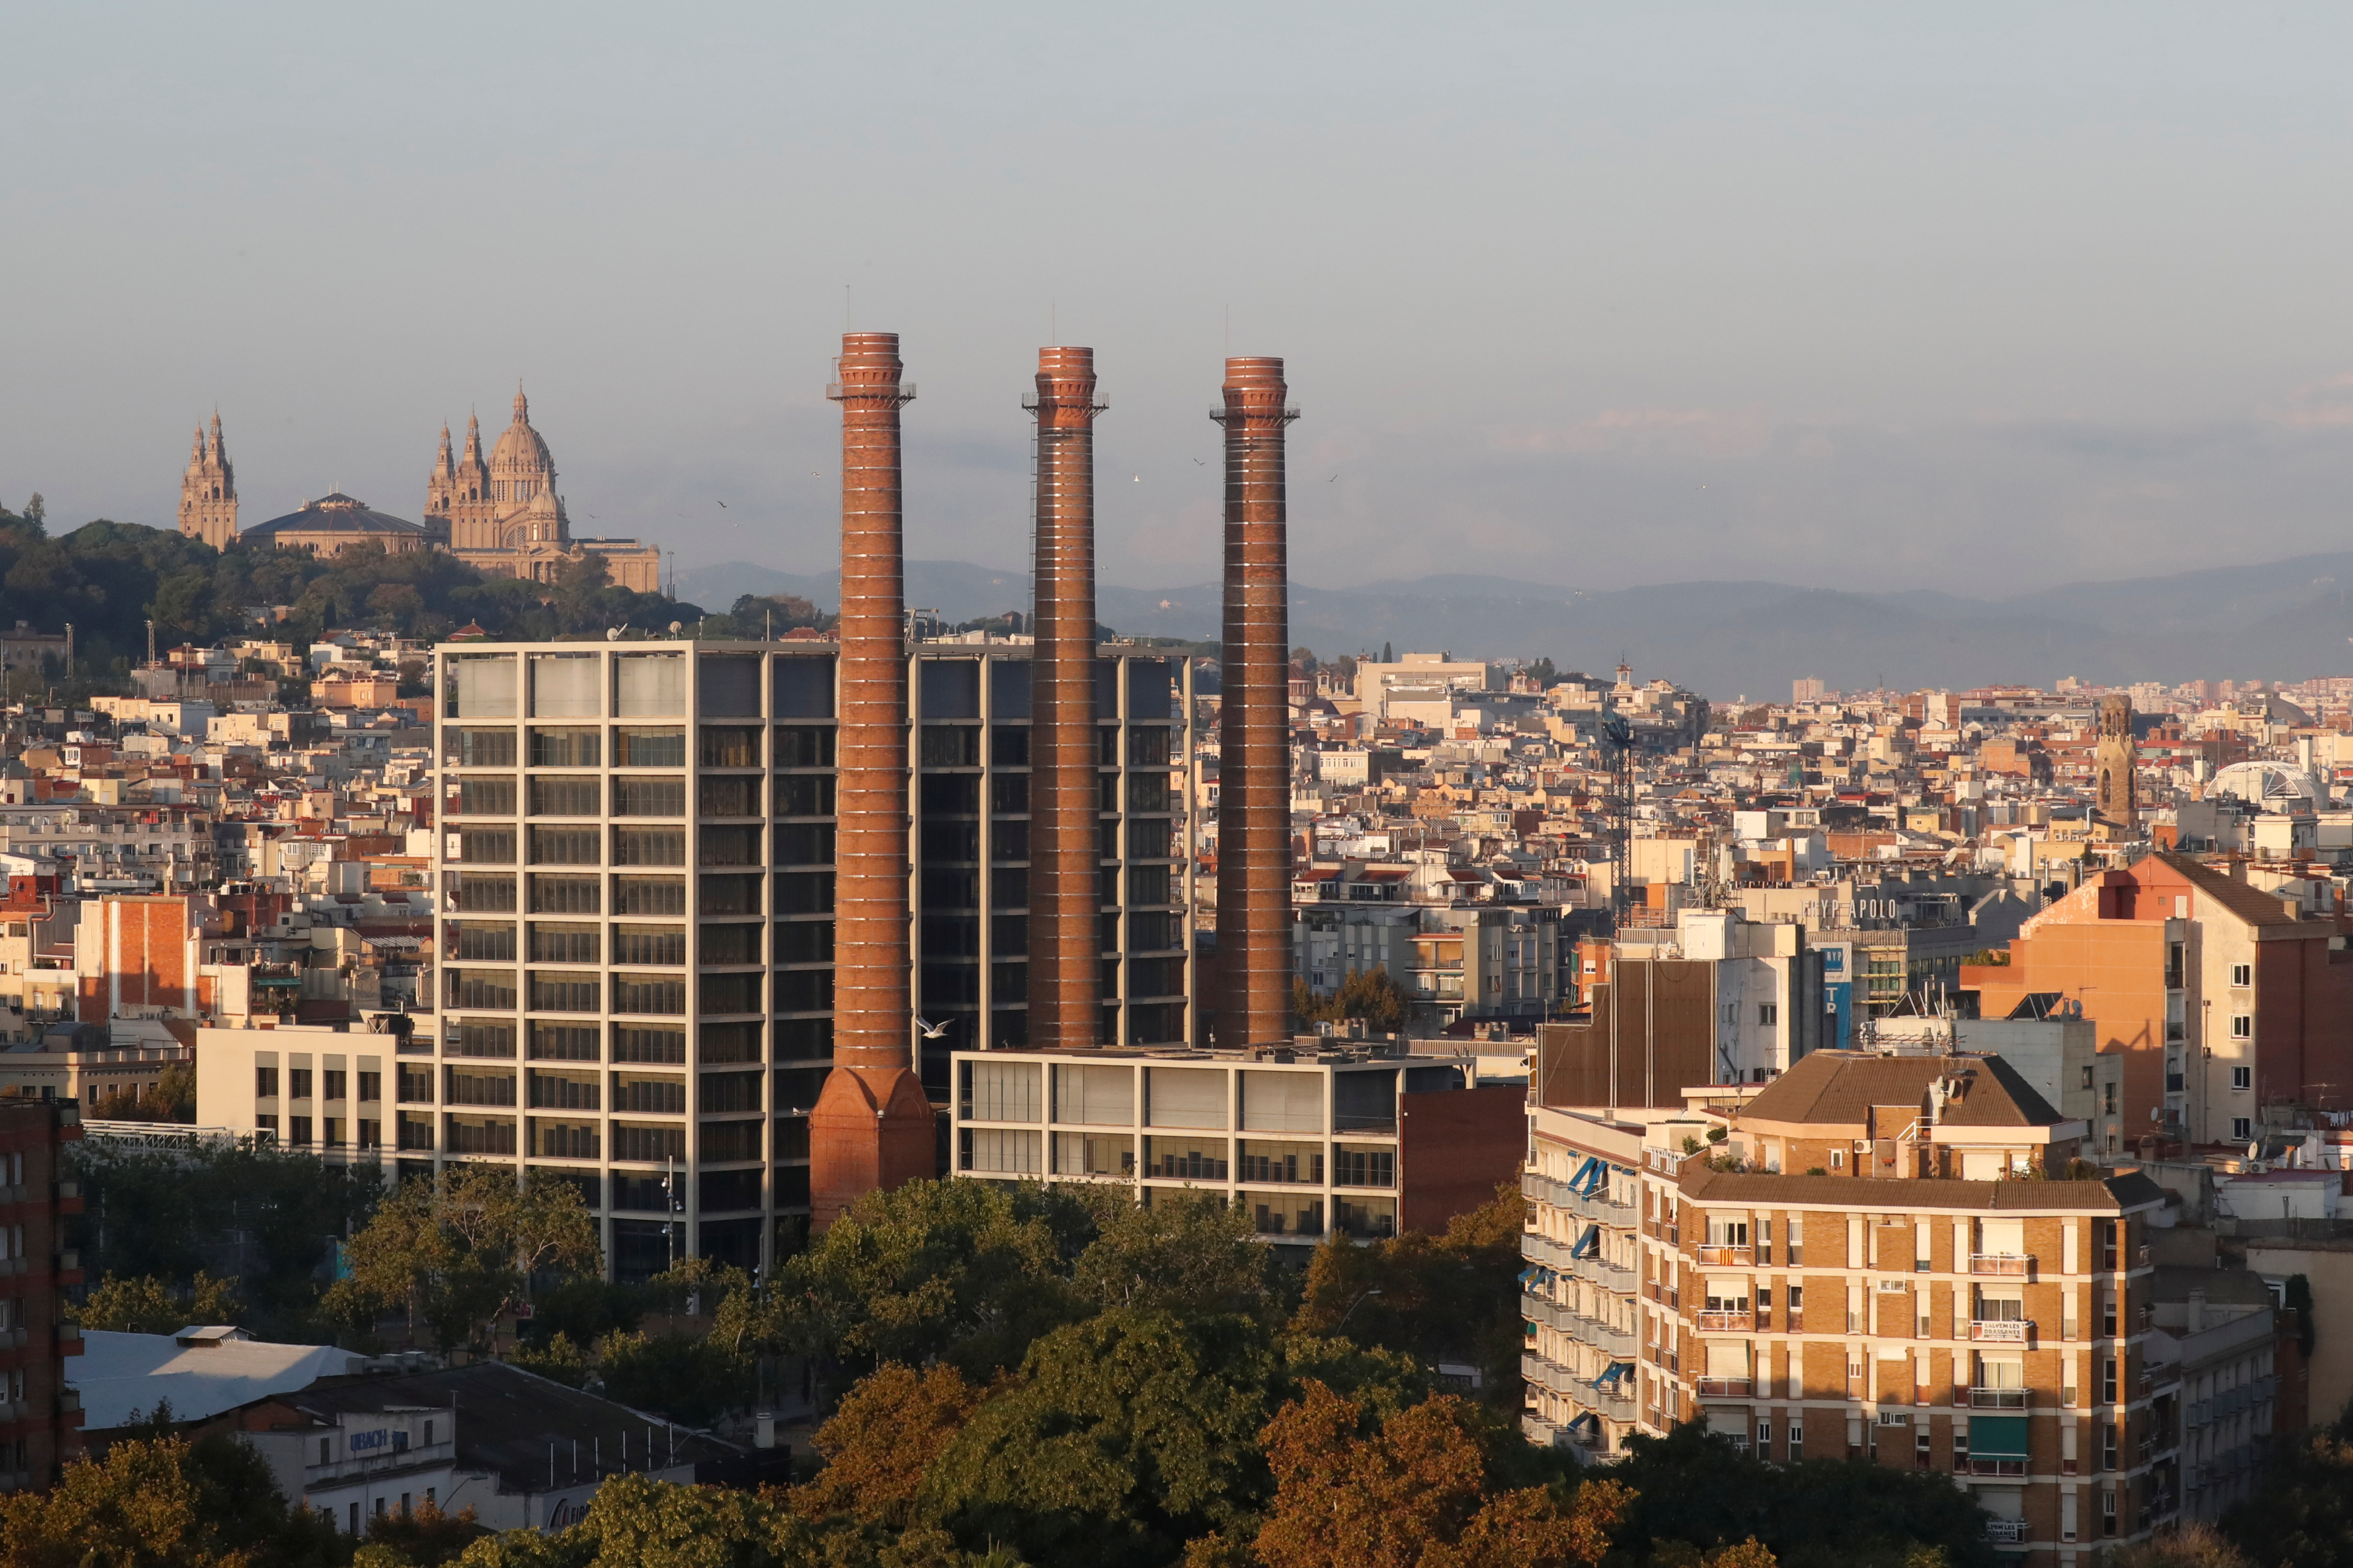 A general view shows Barcelona with Montjuic Castle in the background